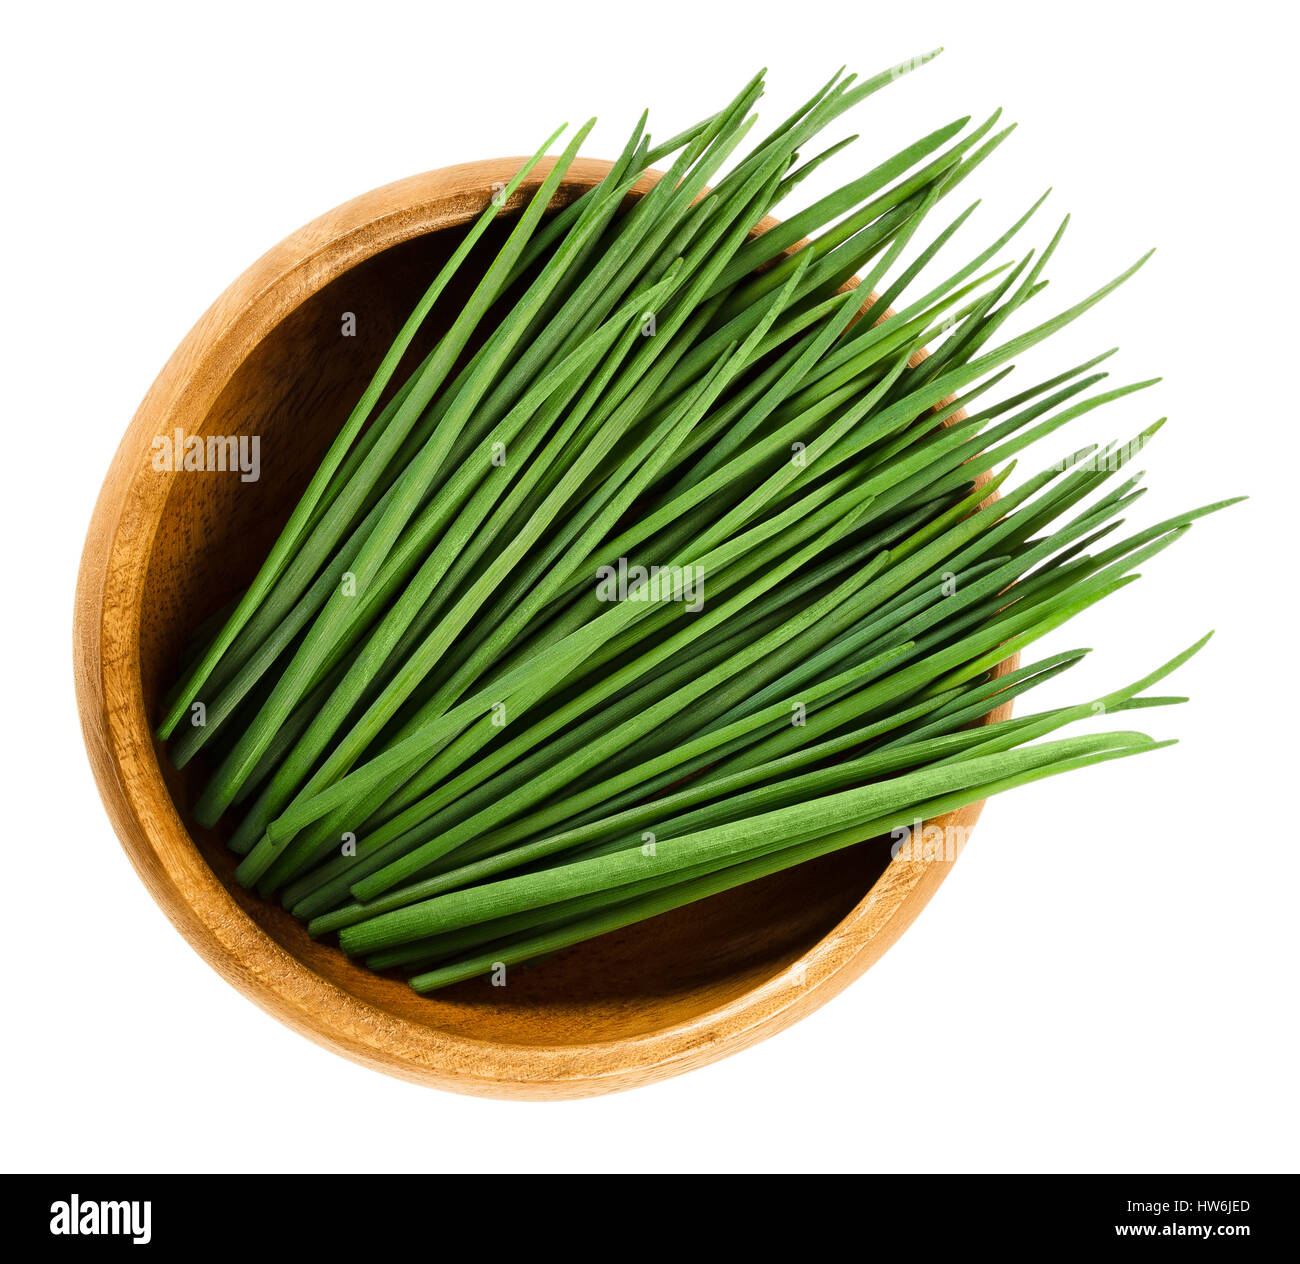 Chives scapes in wooden bowl. Fresh green edible herb of Allium schoenoprasum, used as an ingredient for fish, potatoes and soups. Stock Photo